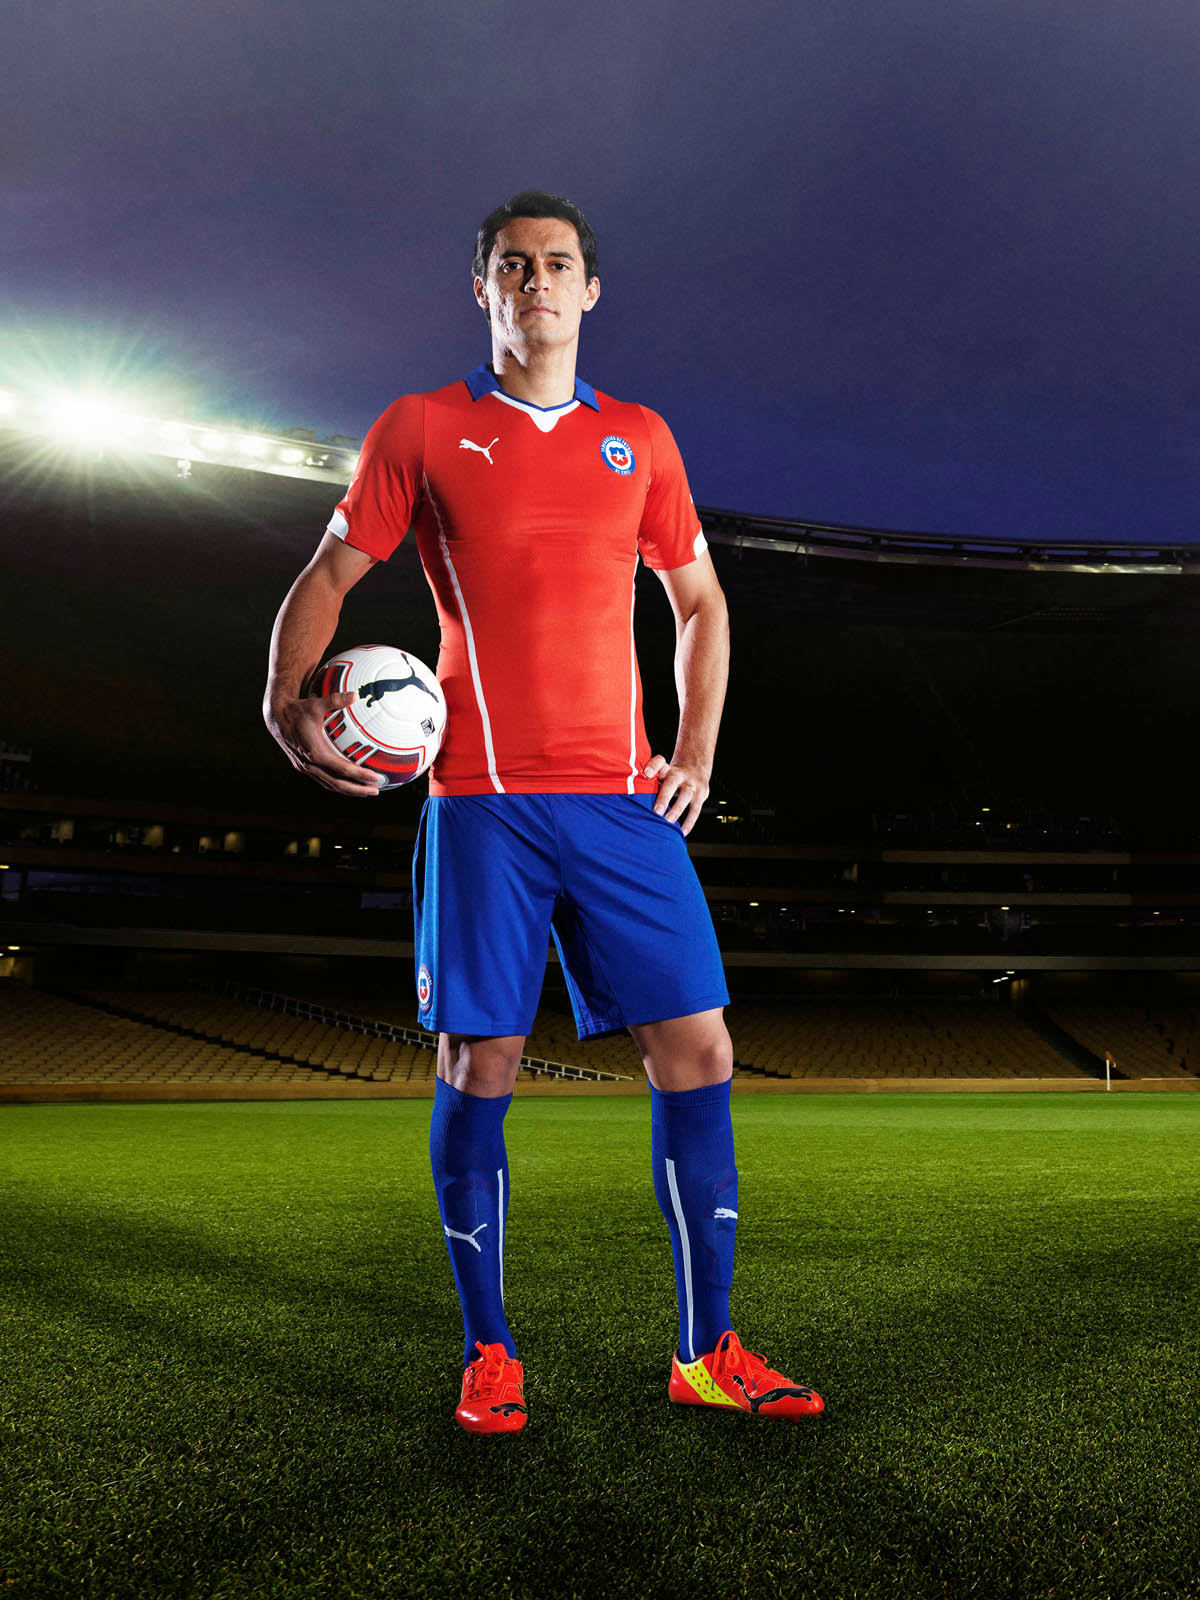 Chile+2014+World+Cup+Kit.jpg